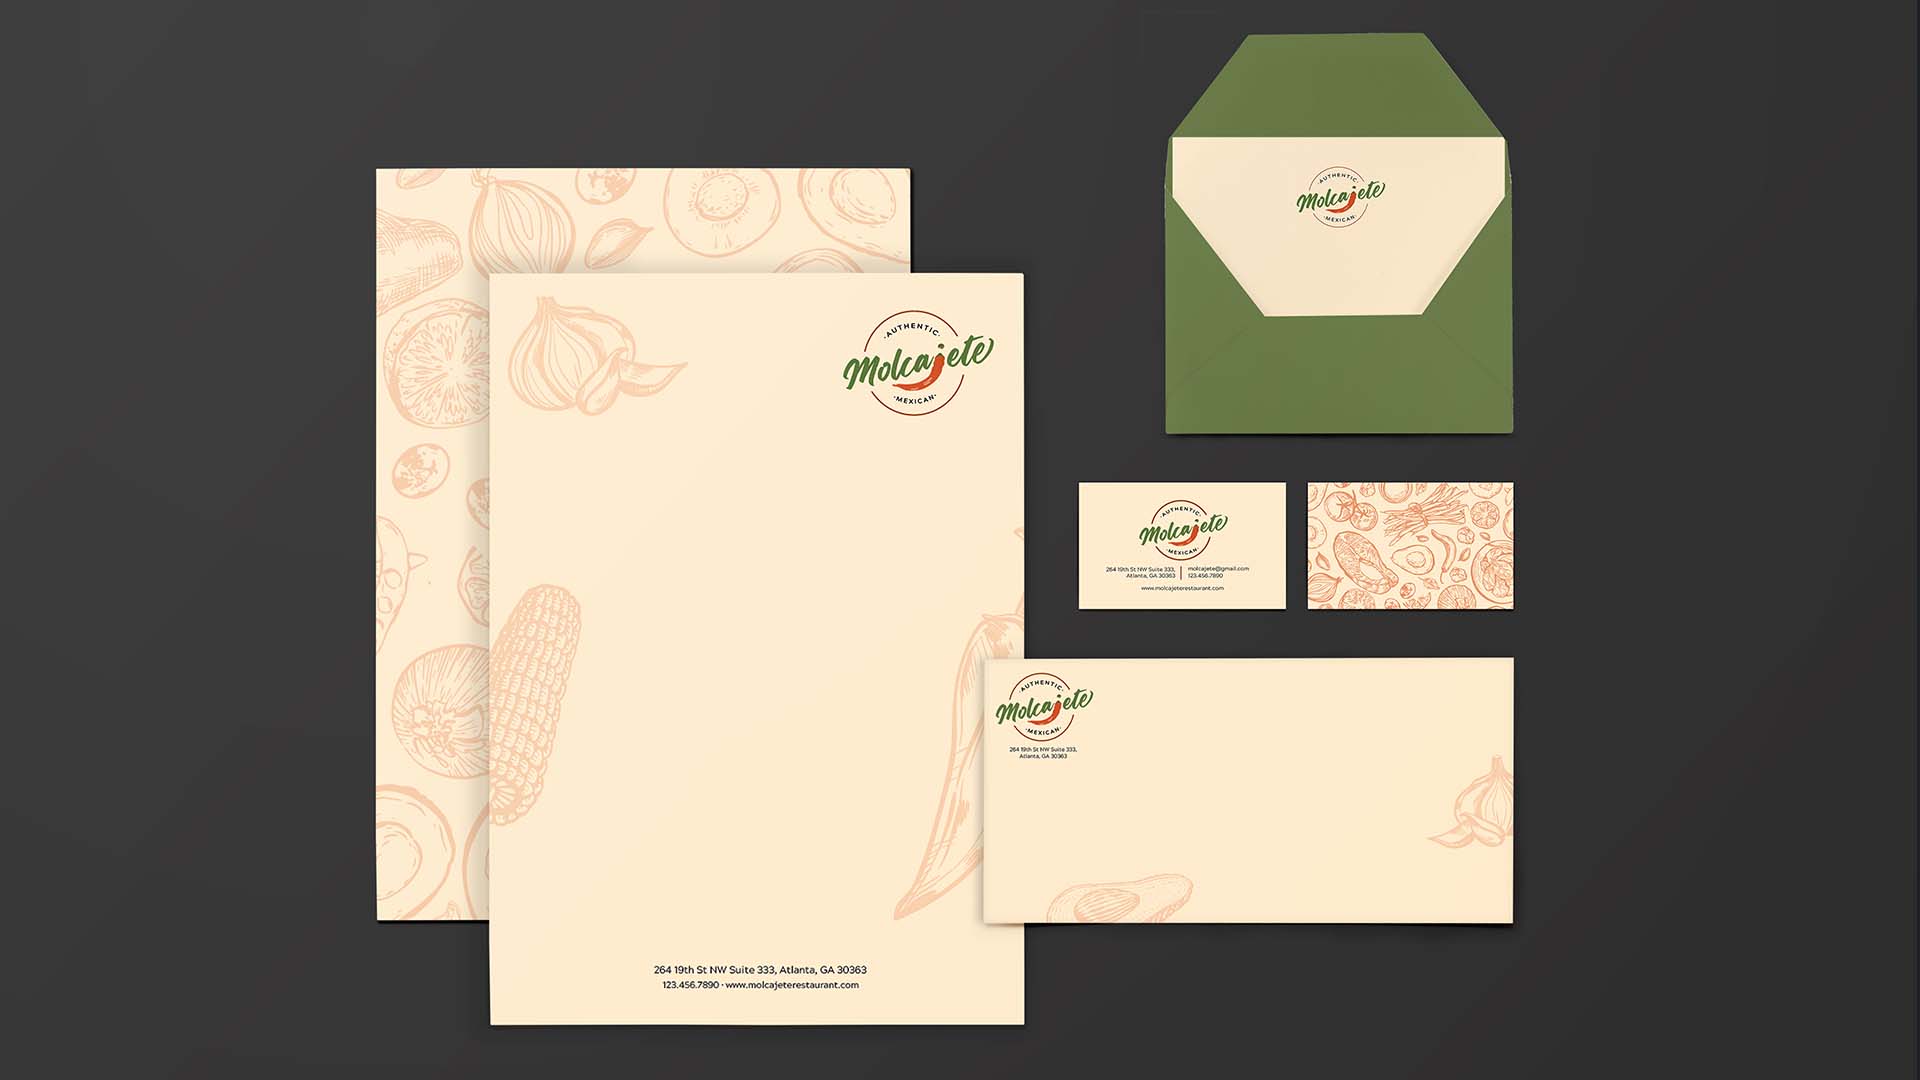  / “Molcajete ID System,” stationery, Letterhead: 8.5 x 11 inches, Envelope: 4.125 x 9.5 inches, Note Card: 3 x 5 inches, Business Card: 3 x 2.5 inches, 2021. This project’s purpose was to create a cohesive brand image for the Molcajete restaurant. 